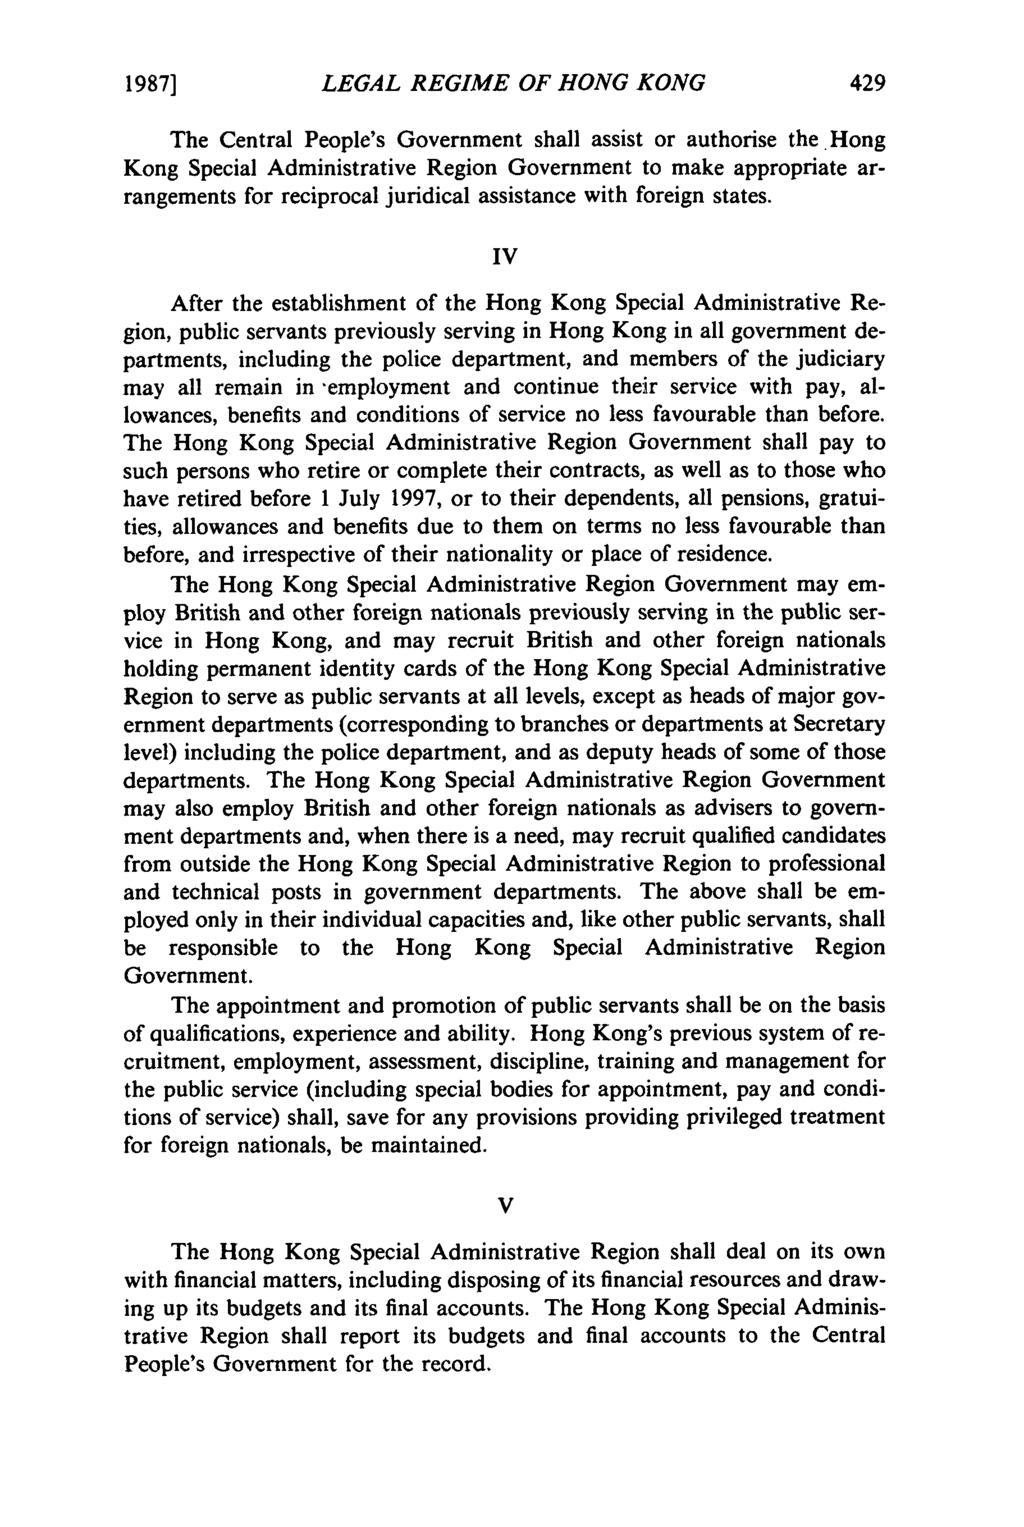 1987] LEGAL REGIME OF HONG KONG The Central People's Government shall assist or authorise the Hong Kong Special Administrative Region Government to make appropriate arrangements for reciprocal